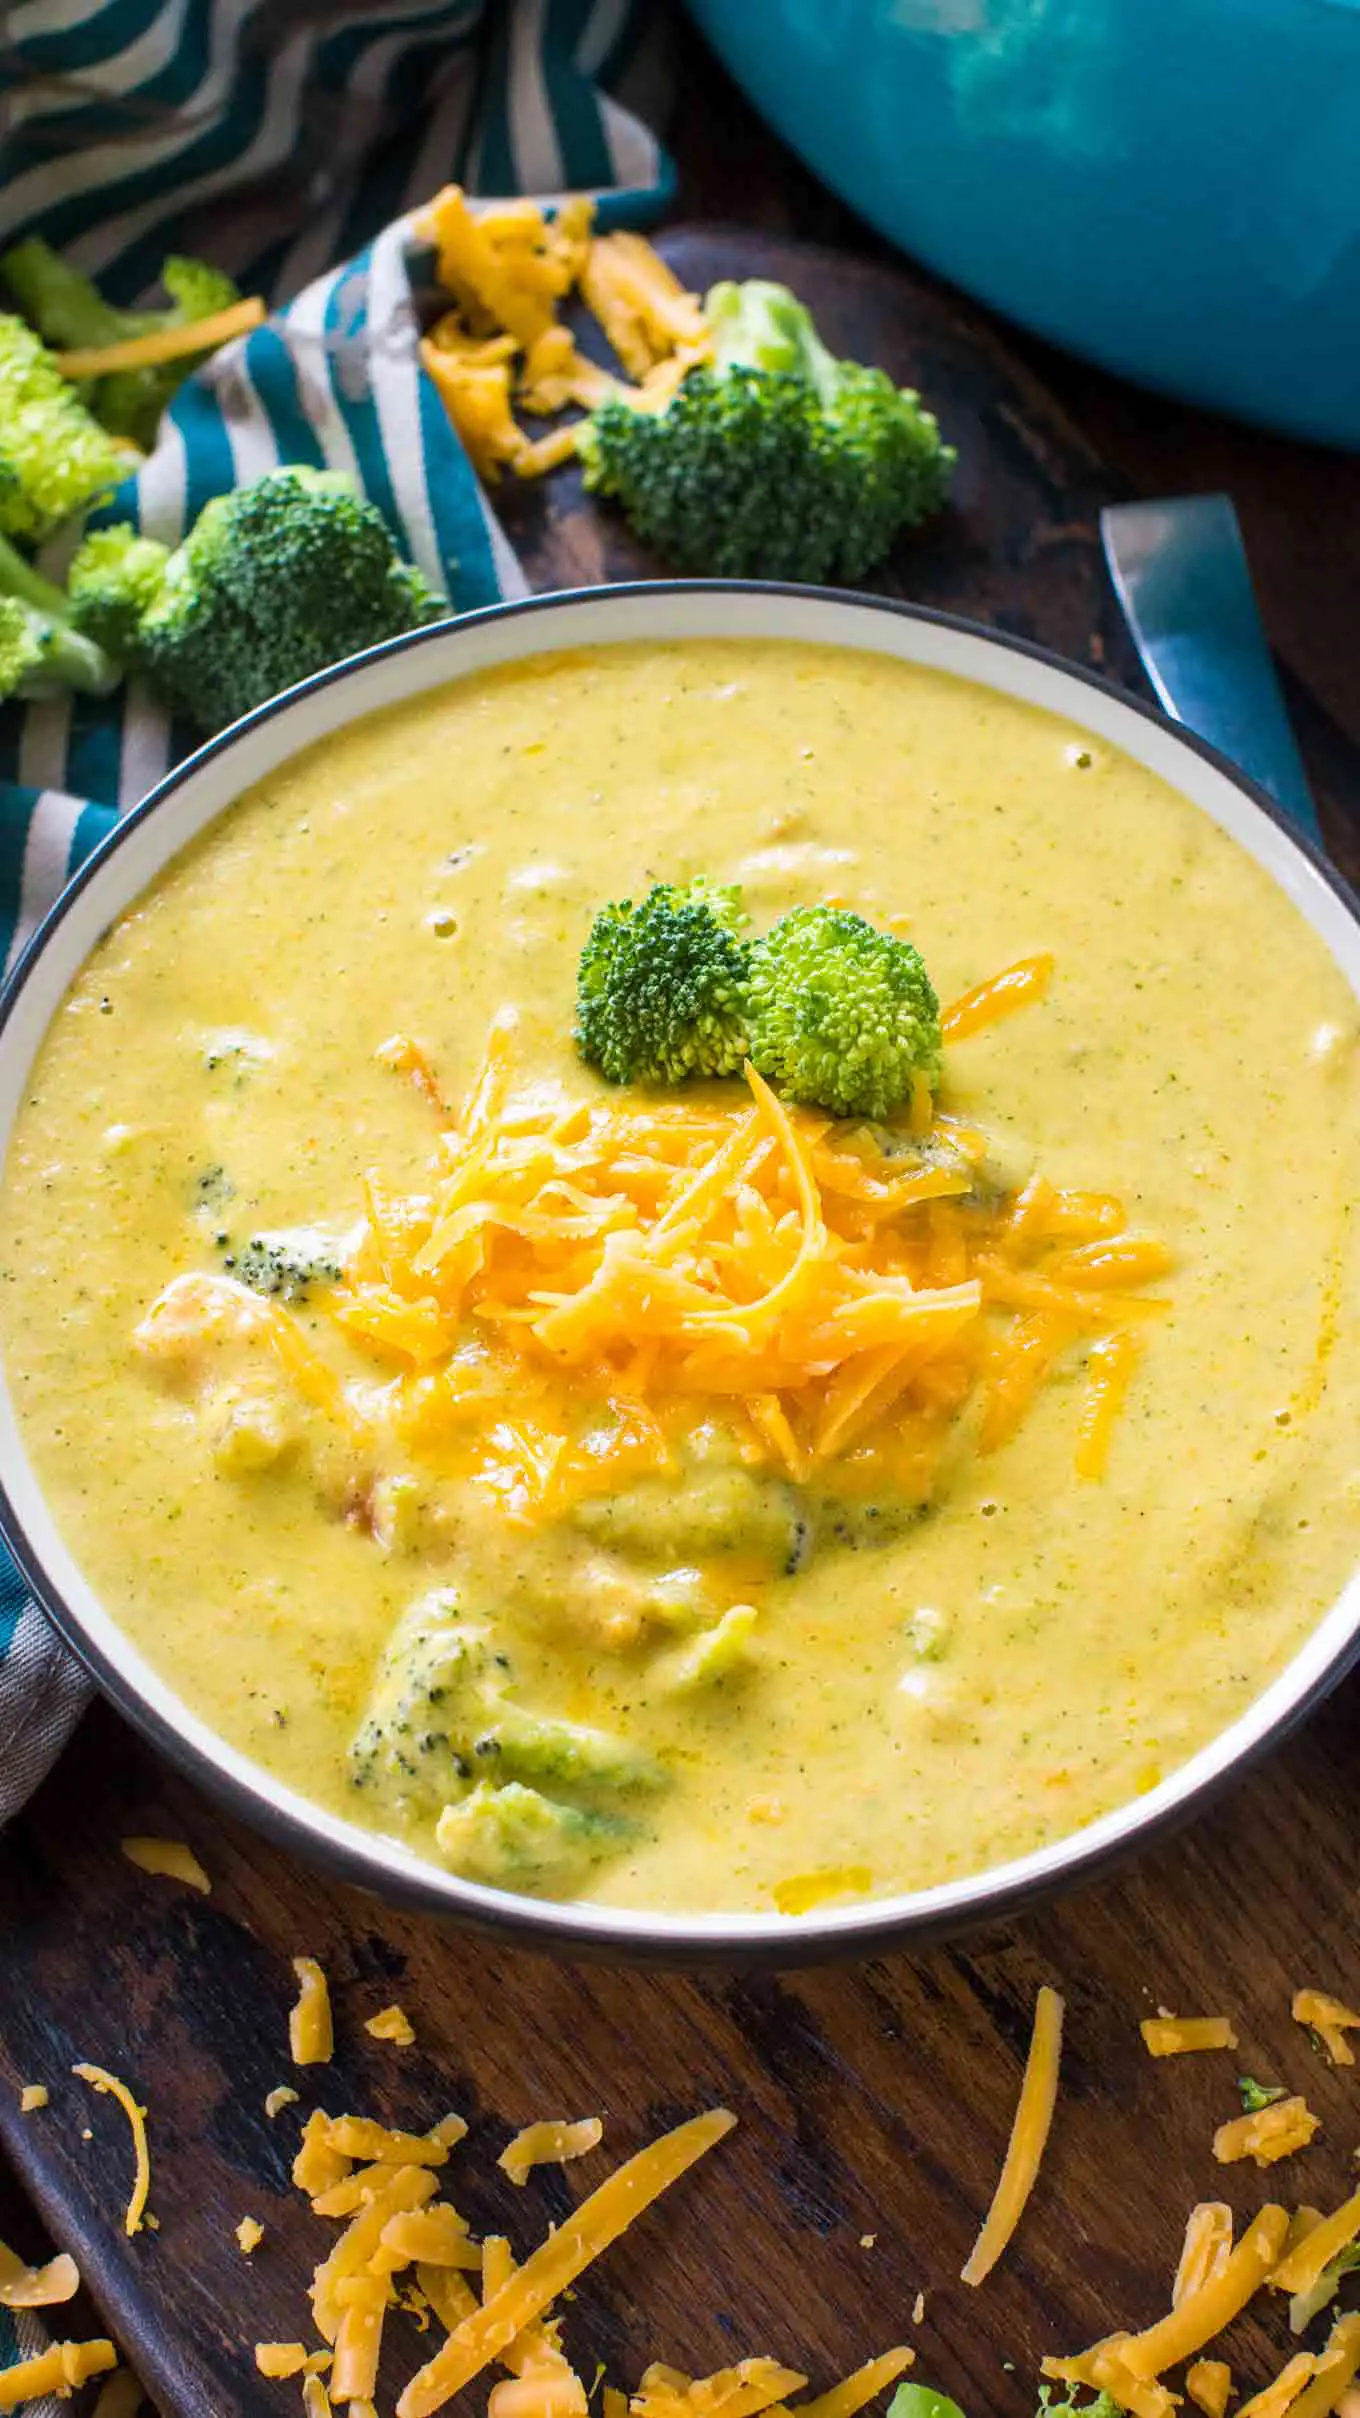 Panera Bread Broccoli Cheddar Soup Copycat [VIDEO] - Sweet and Savory Meals